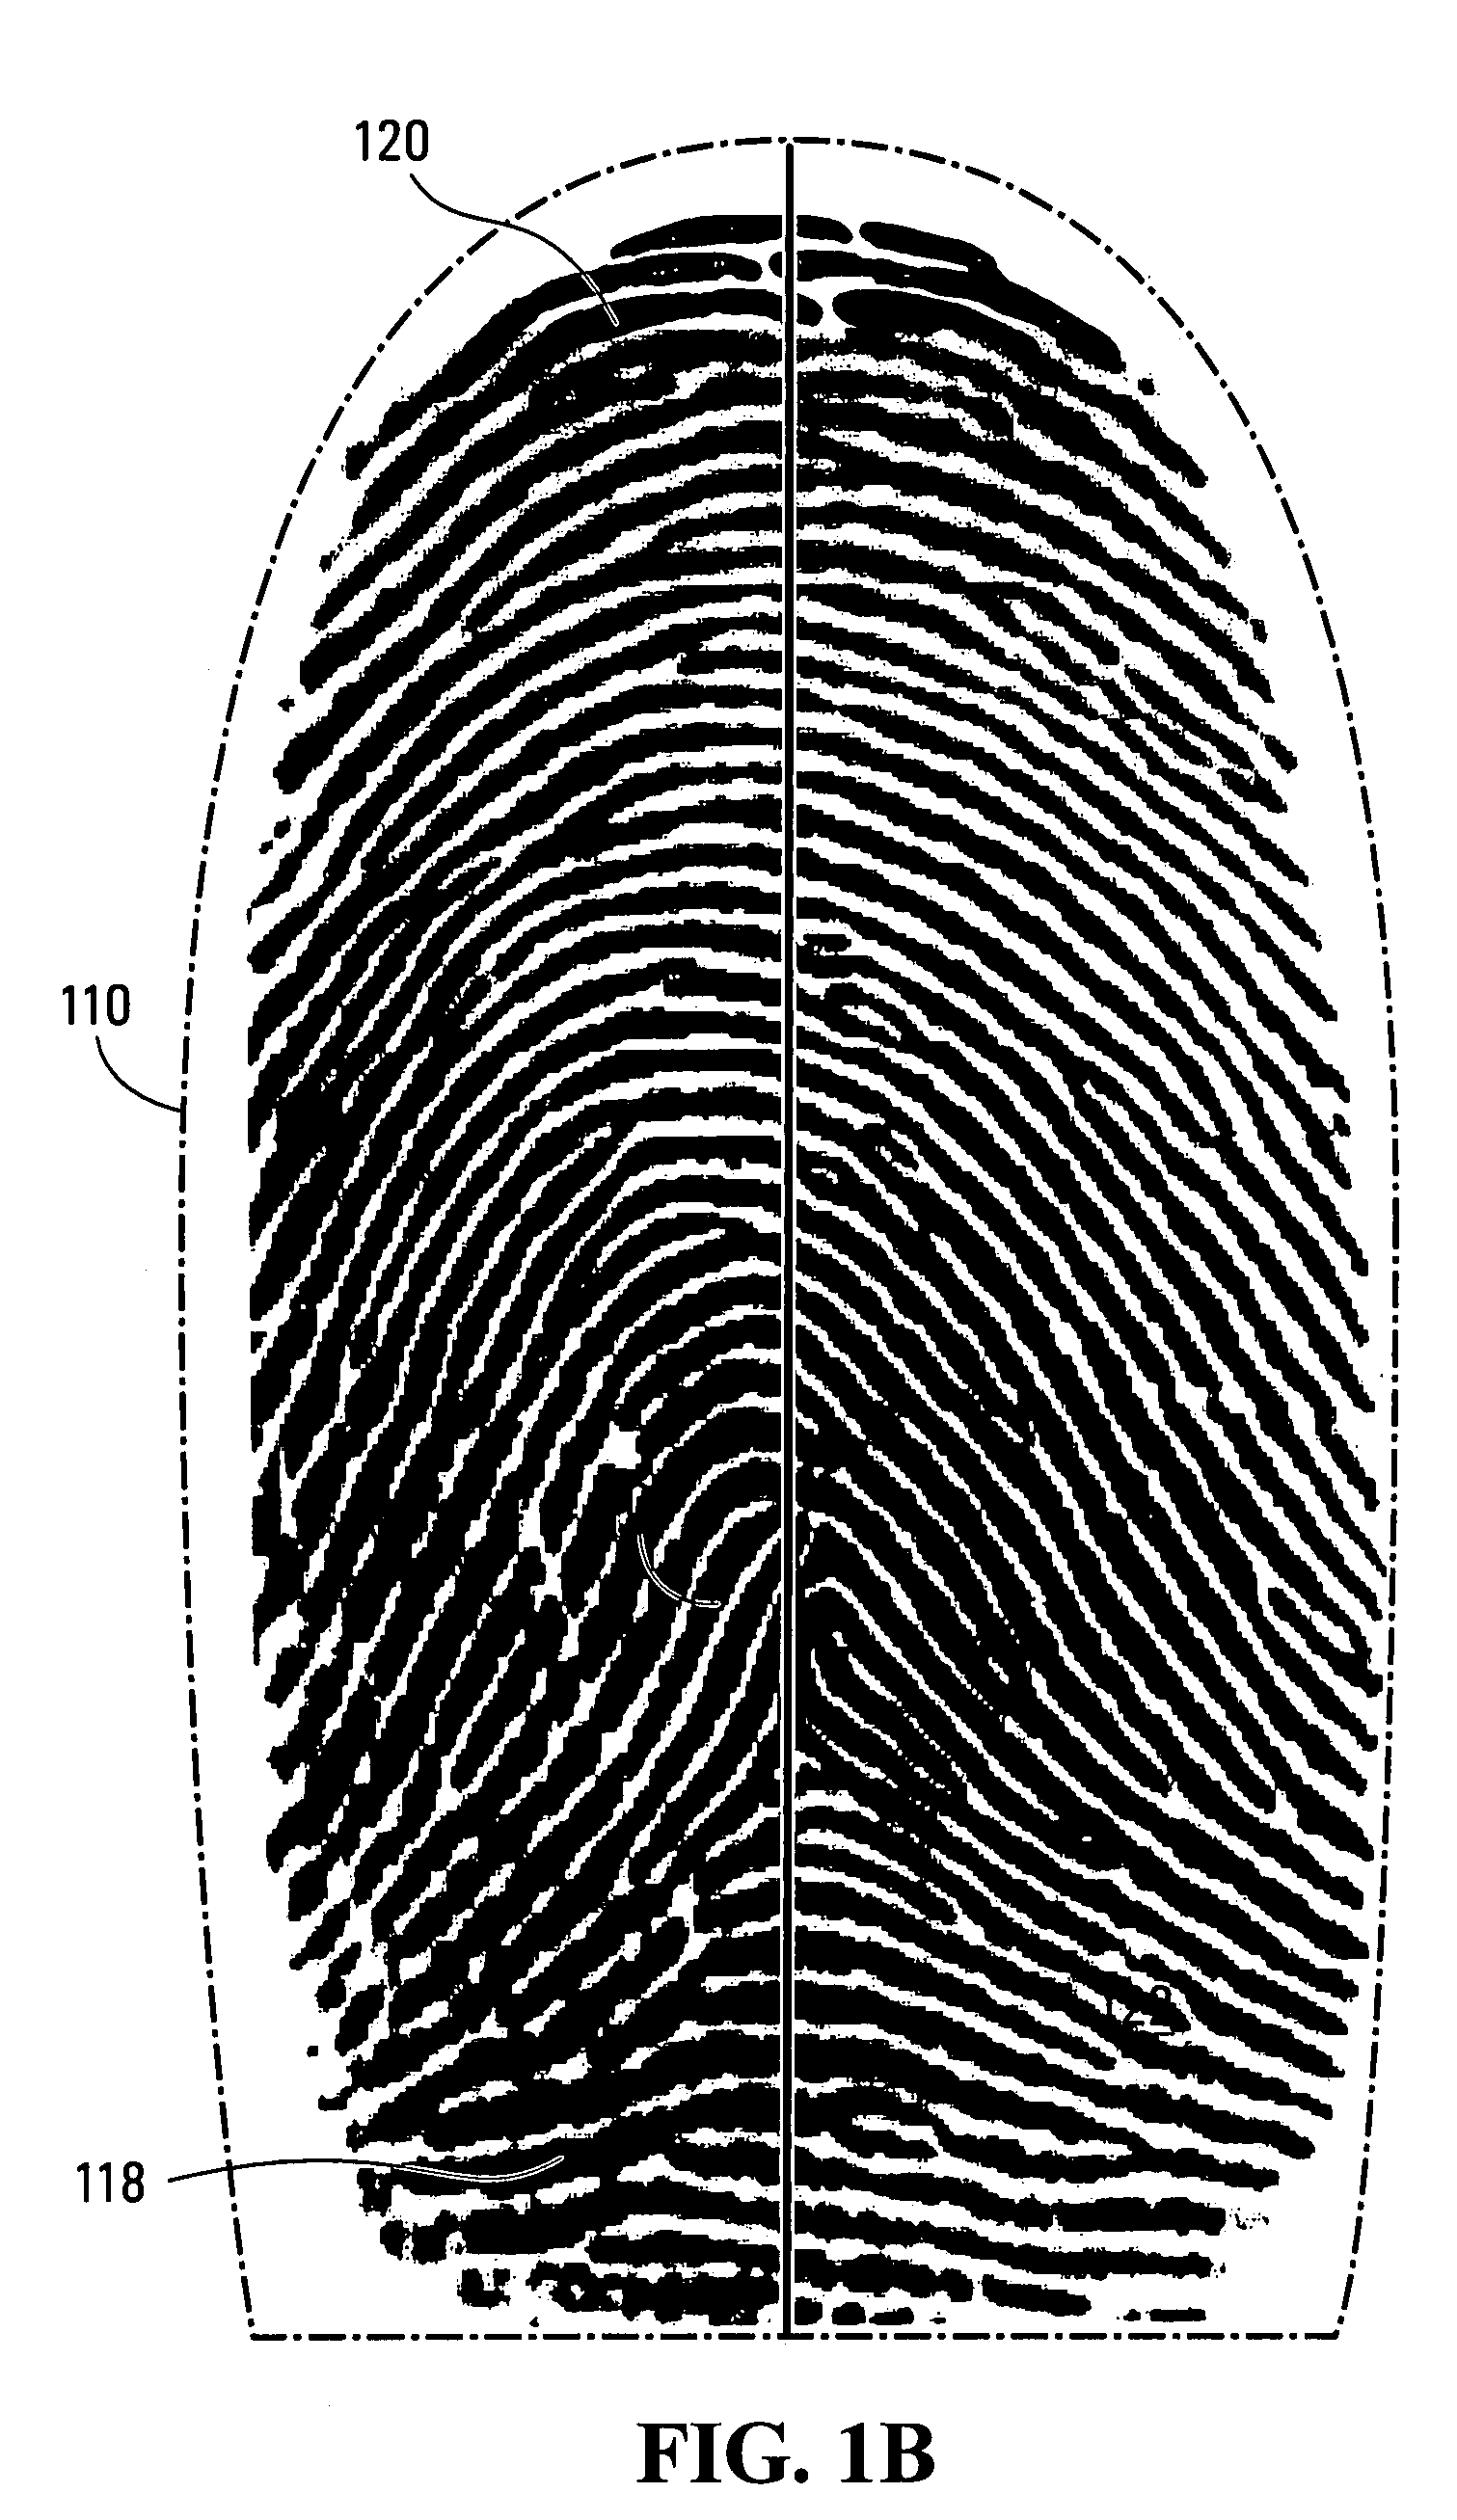 Methods and systems for automated fingerprint recognition